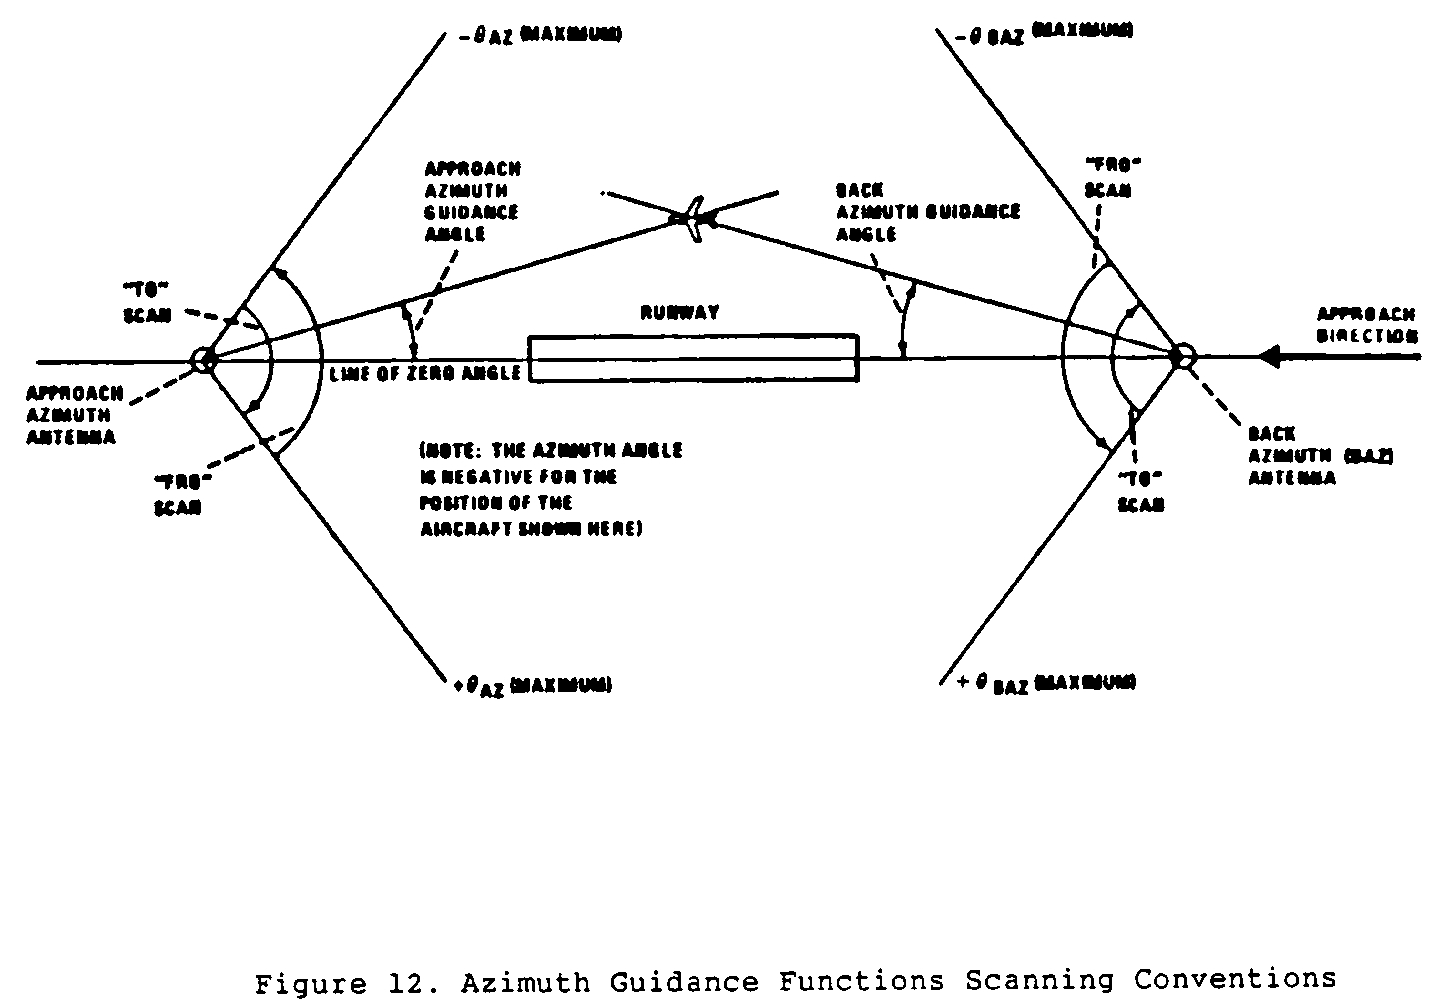 Graphic of (l) Scanning conventions. Figure 12 shows the approach azimuth and back azimuth scanning conventions.